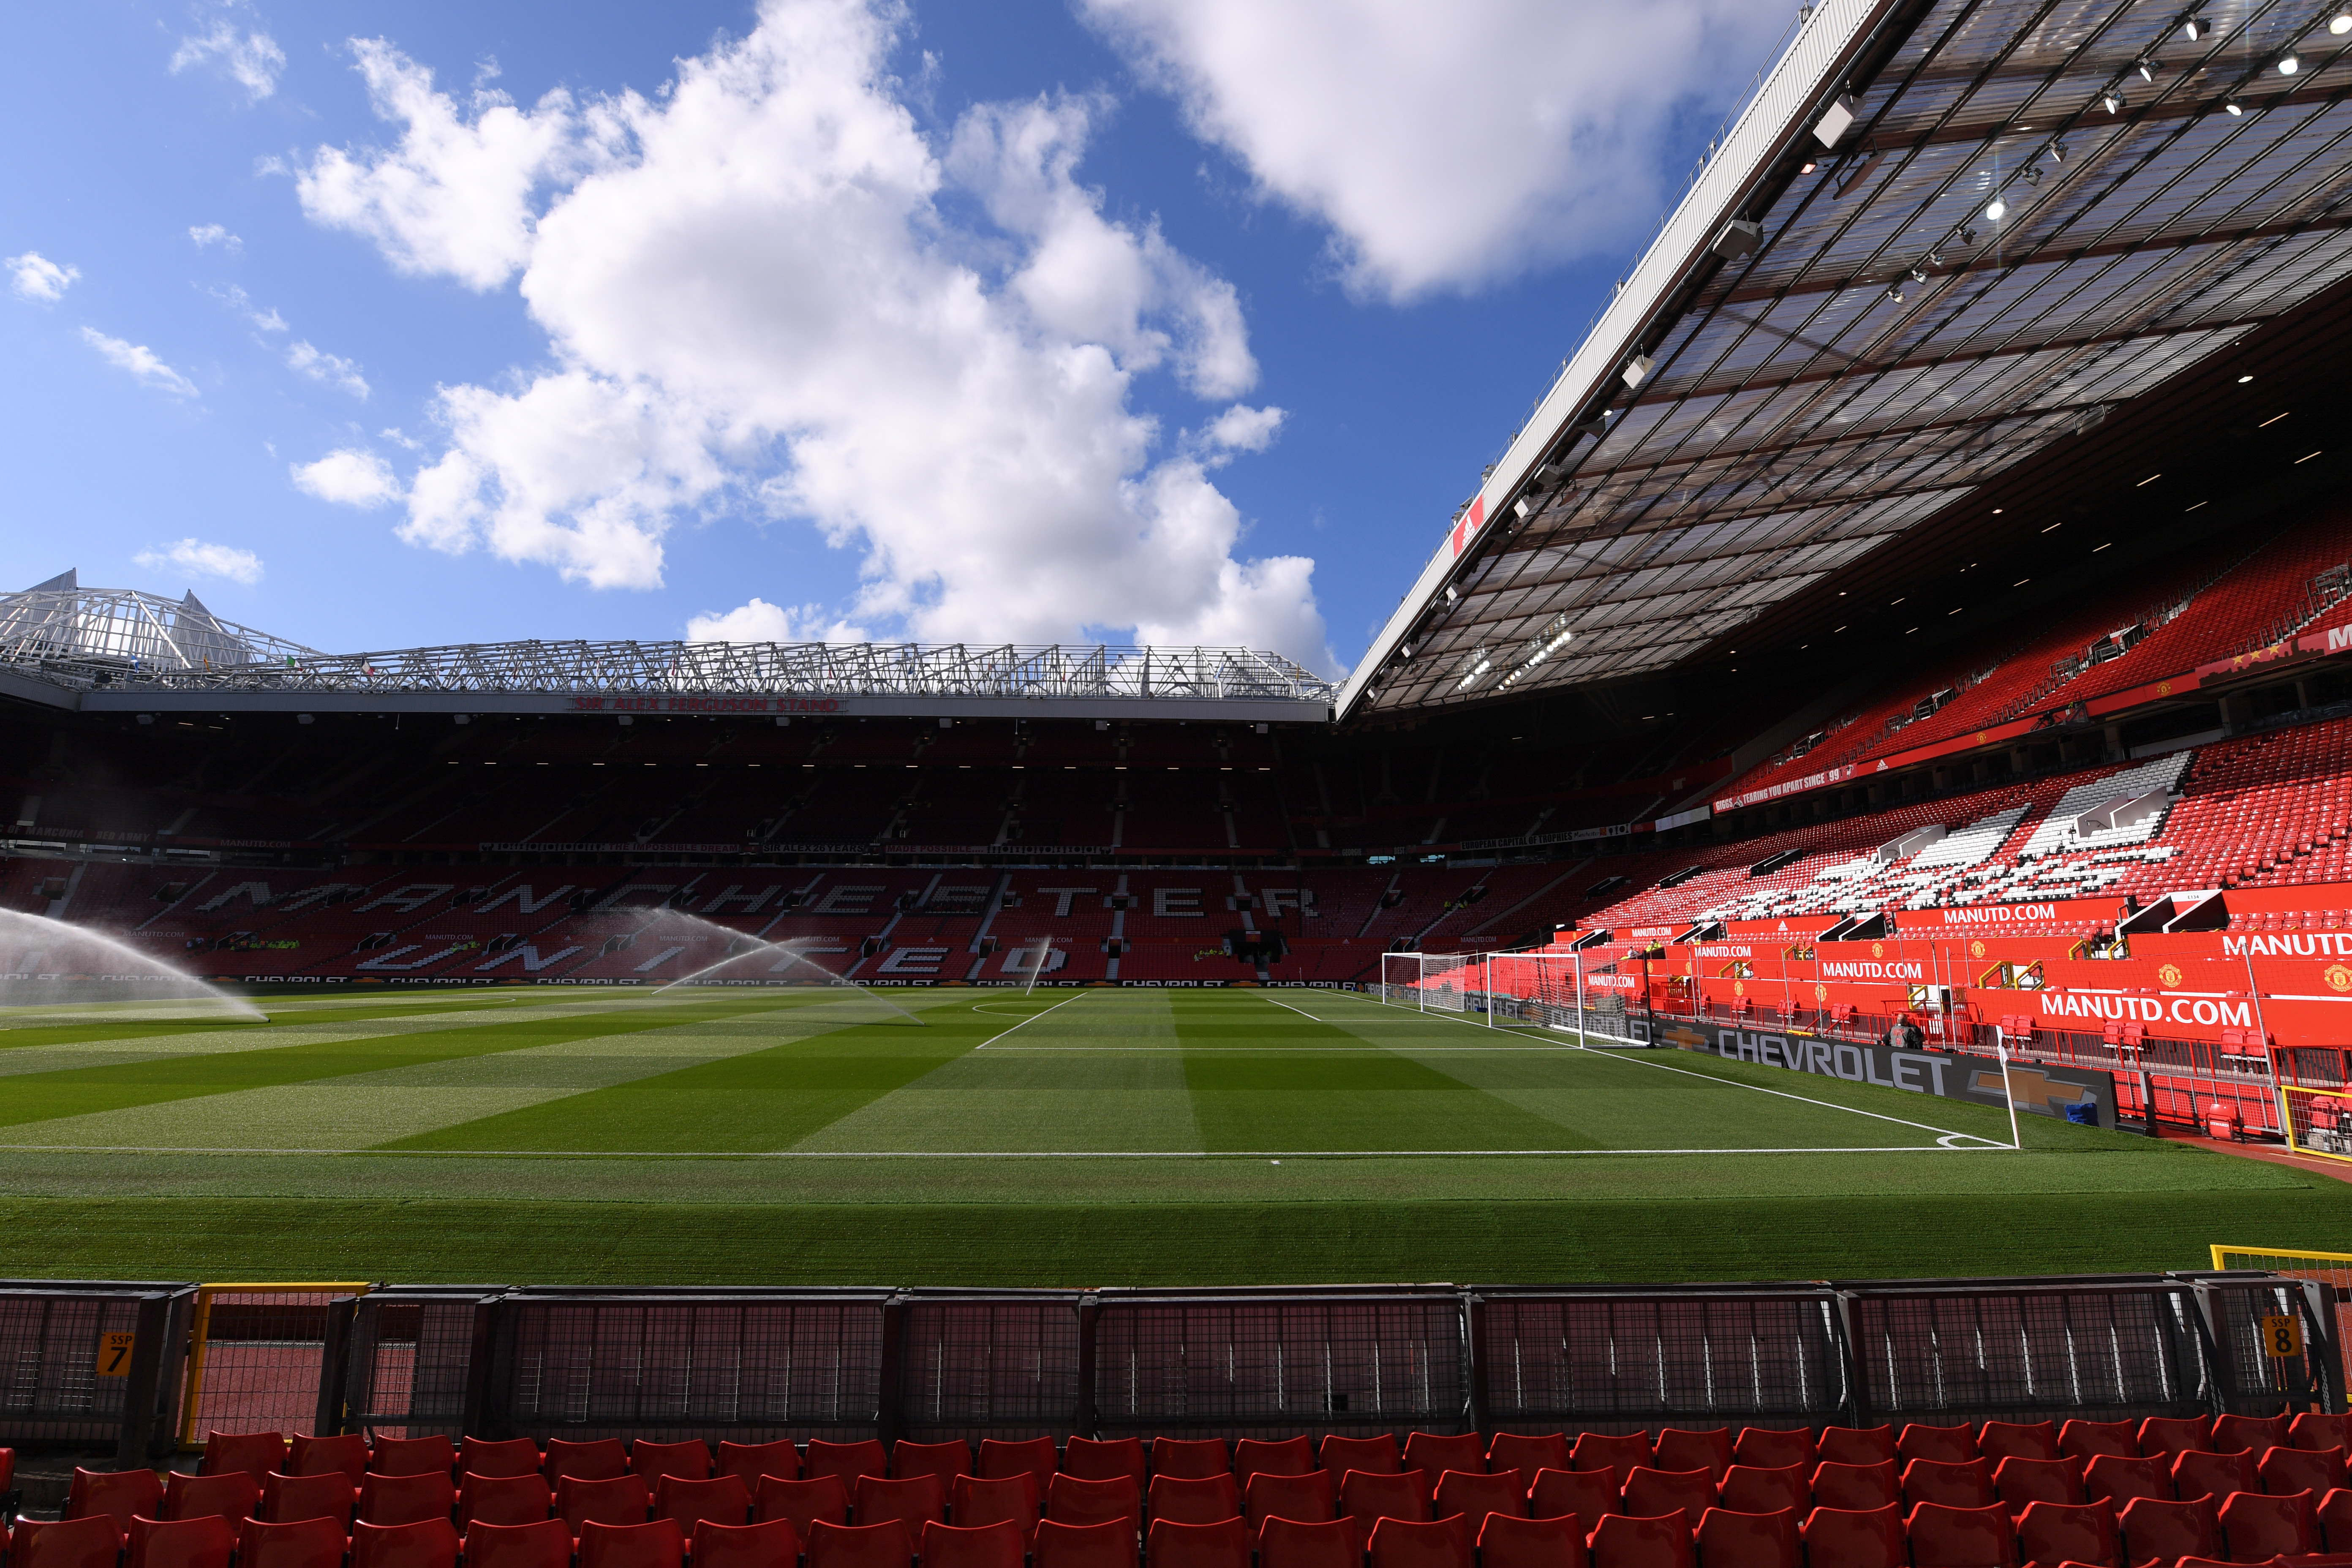 MANCHESTER, ENGLAND - AUGUST 10:  General view inside the stadium prior to the Premier League match between Manchester United and Leicester City at Old Trafford on August 10, 2018 in Manchester, United Kingdom.  (Photo by Laurence Griffiths/Getty Images)